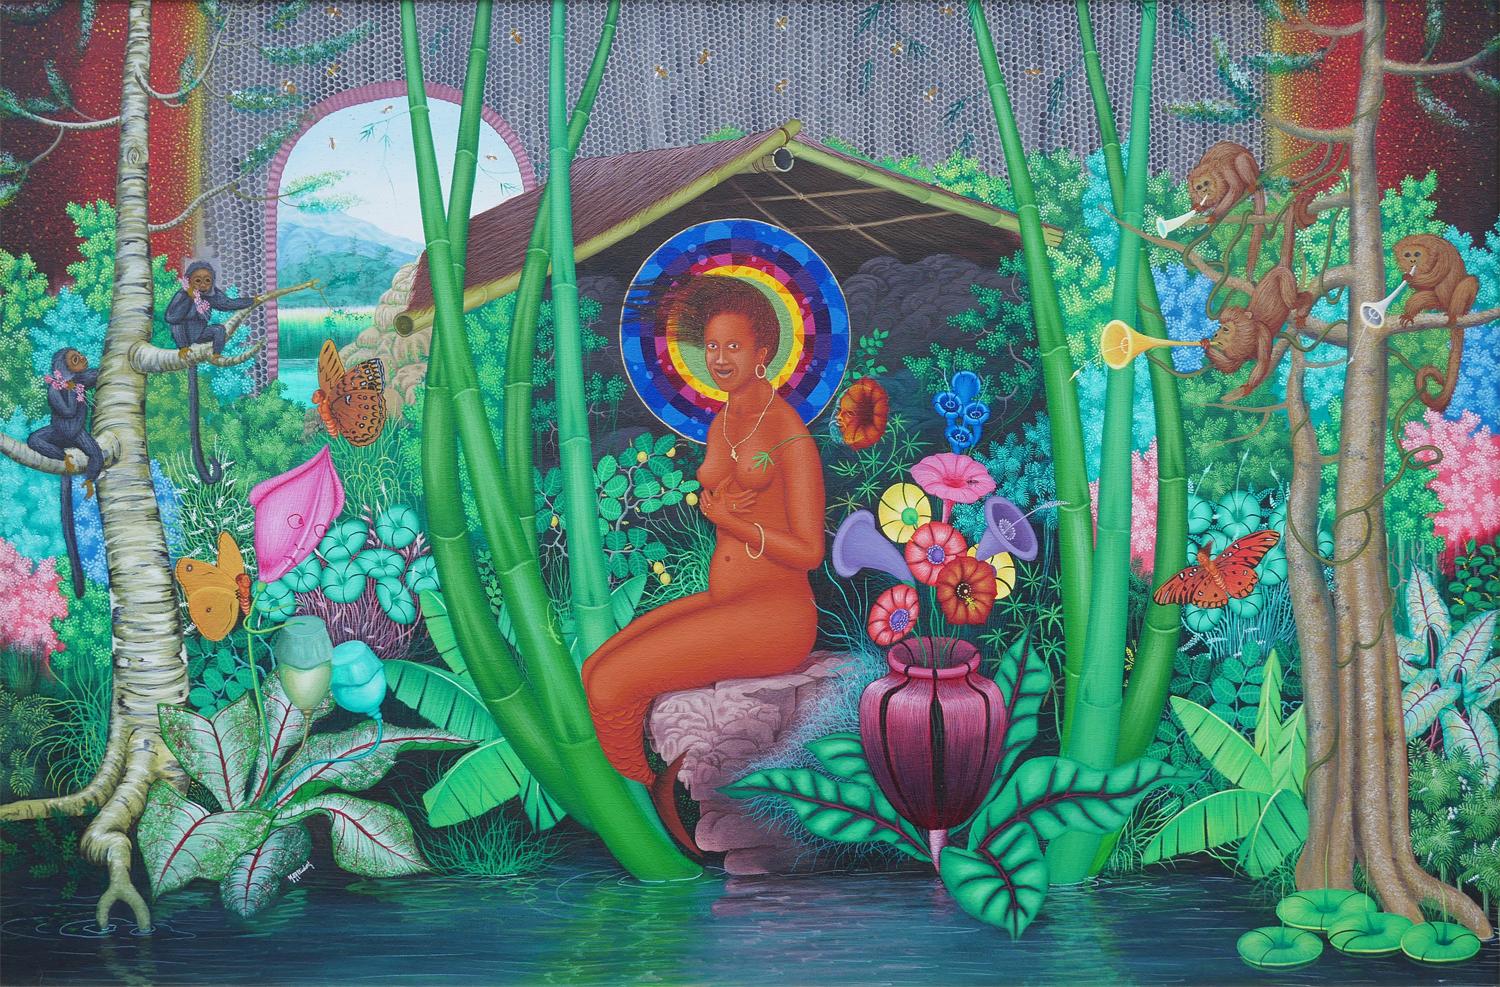 Colorful tropical jungle landscape painting by Haitian artist Michael-Ange. The work features a central nude female figure set next to a body of water and surrounded by lush vegetation, monkeys, and butterflies. Signed in the front lower left